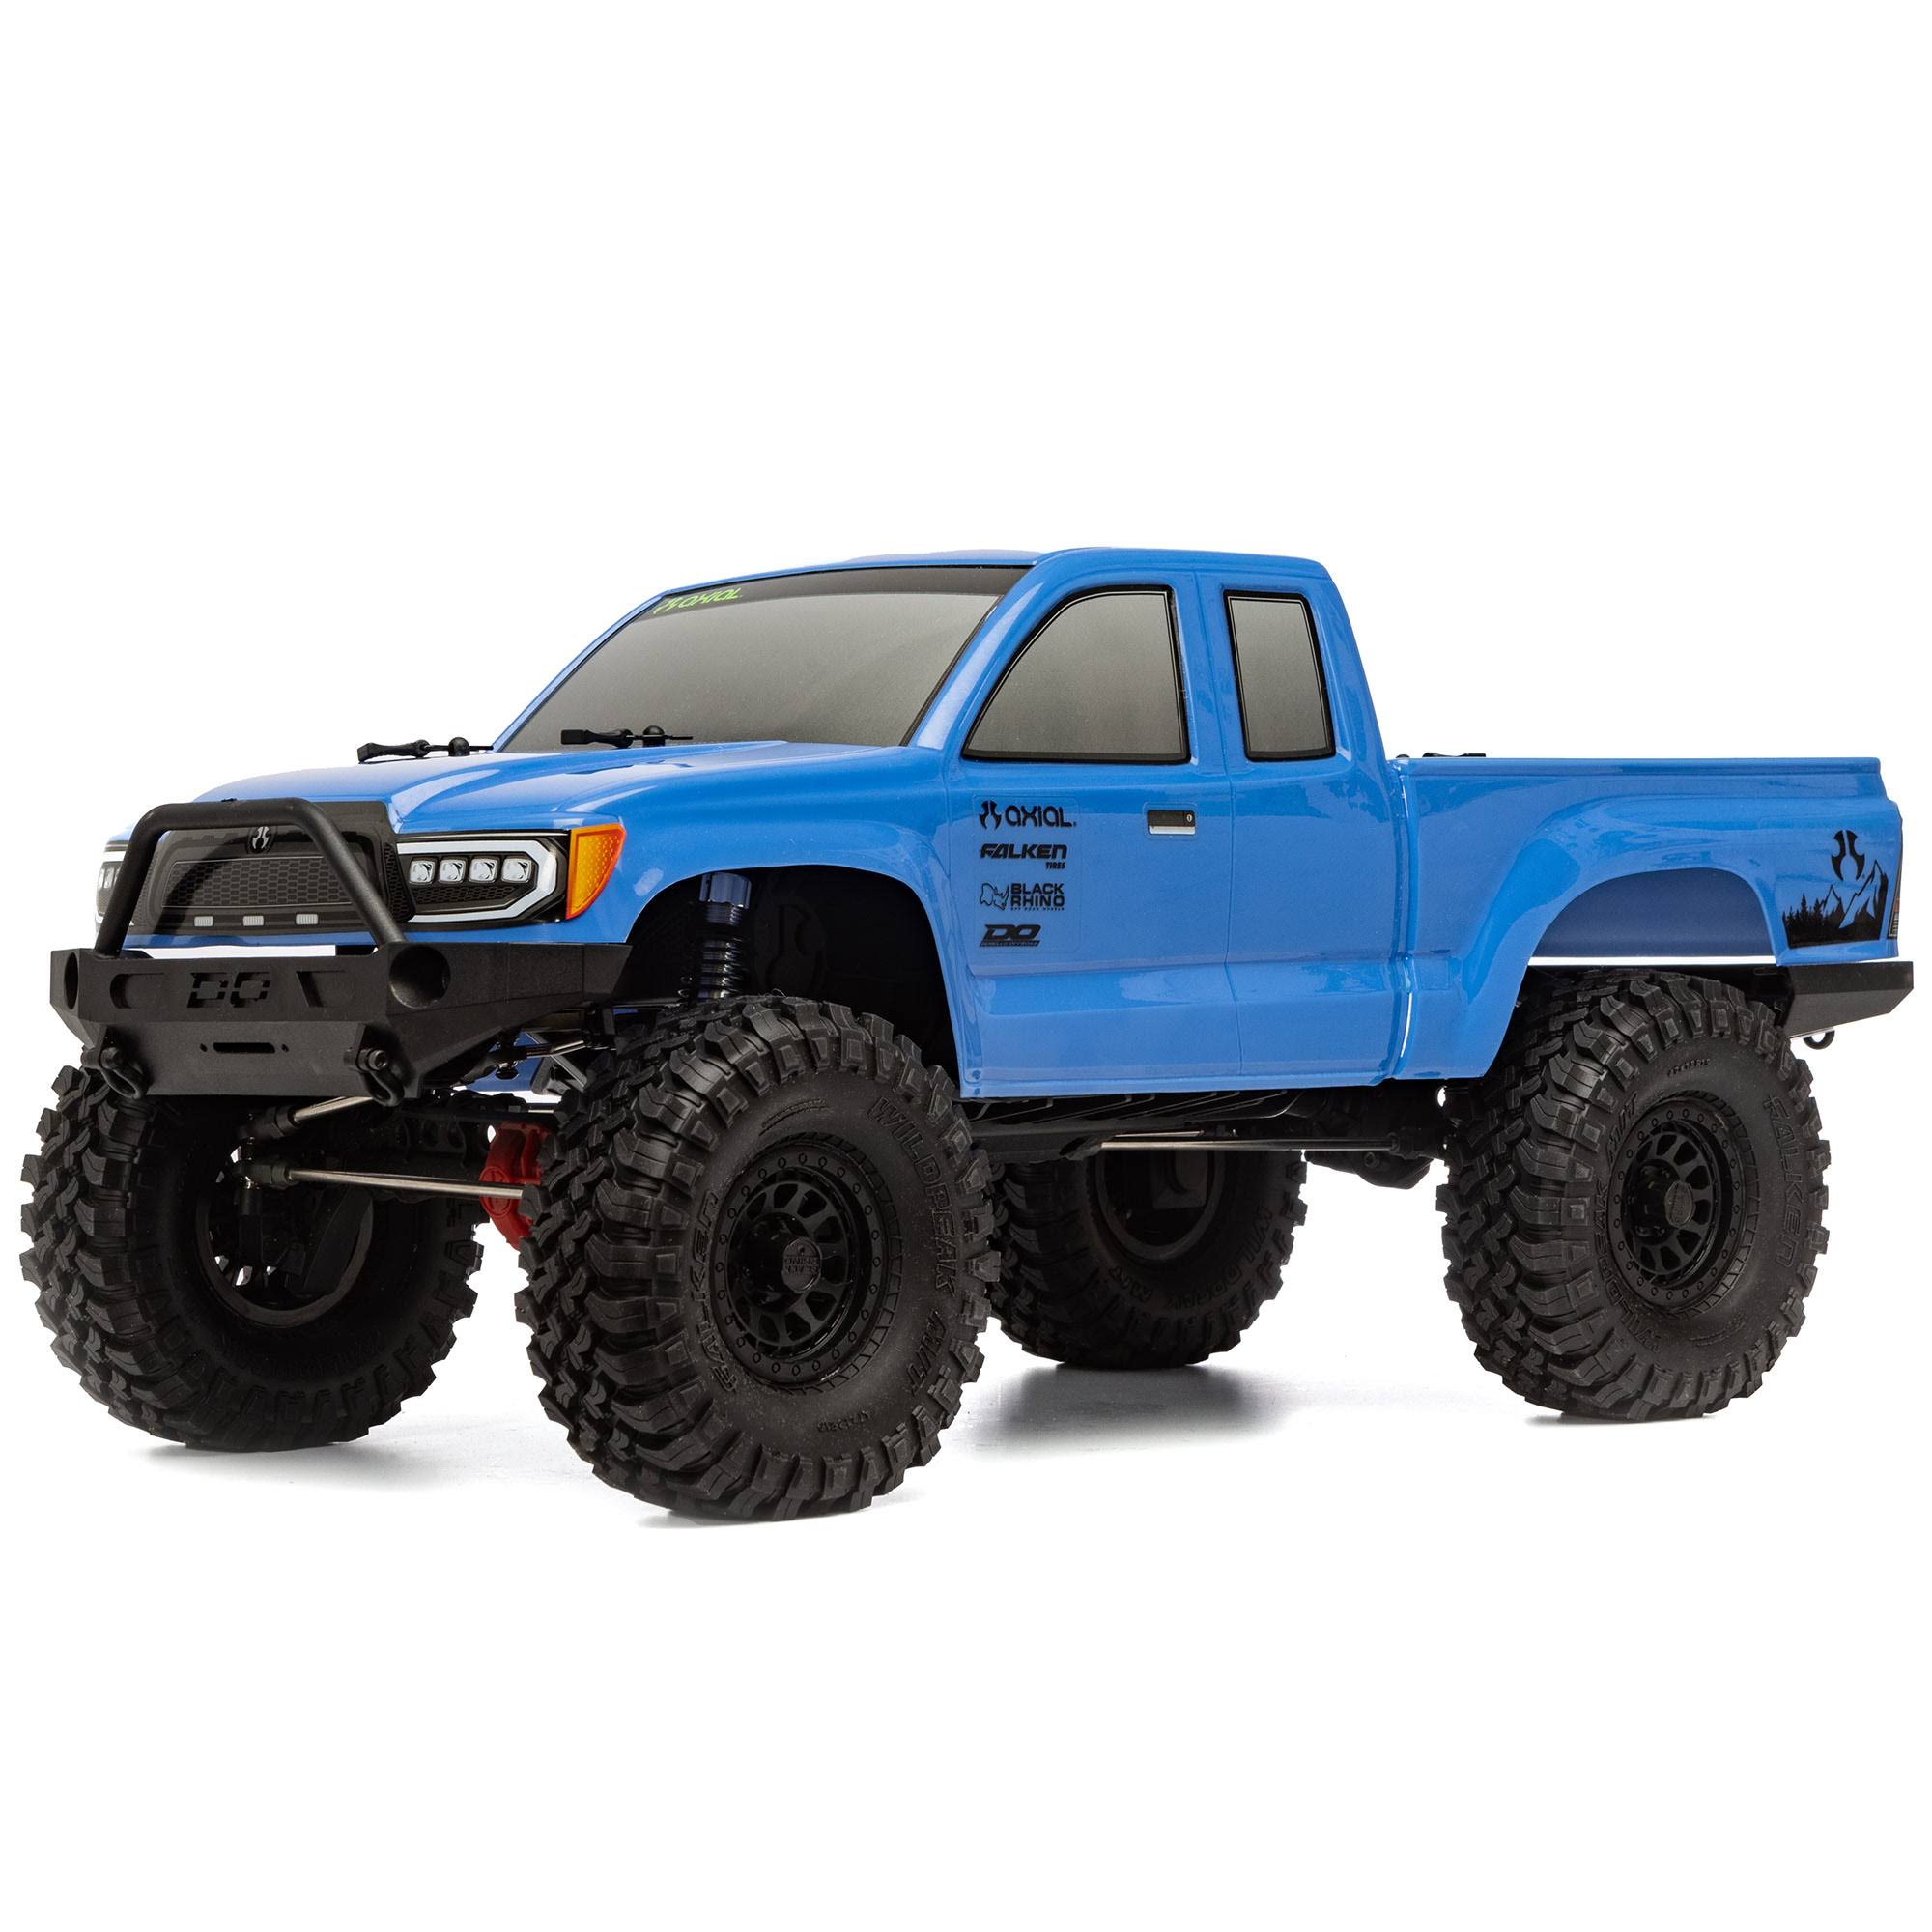 Axial 1/10 Scx10 III Base Camp 4WD Rock Crawler Brushed RTR - Blue